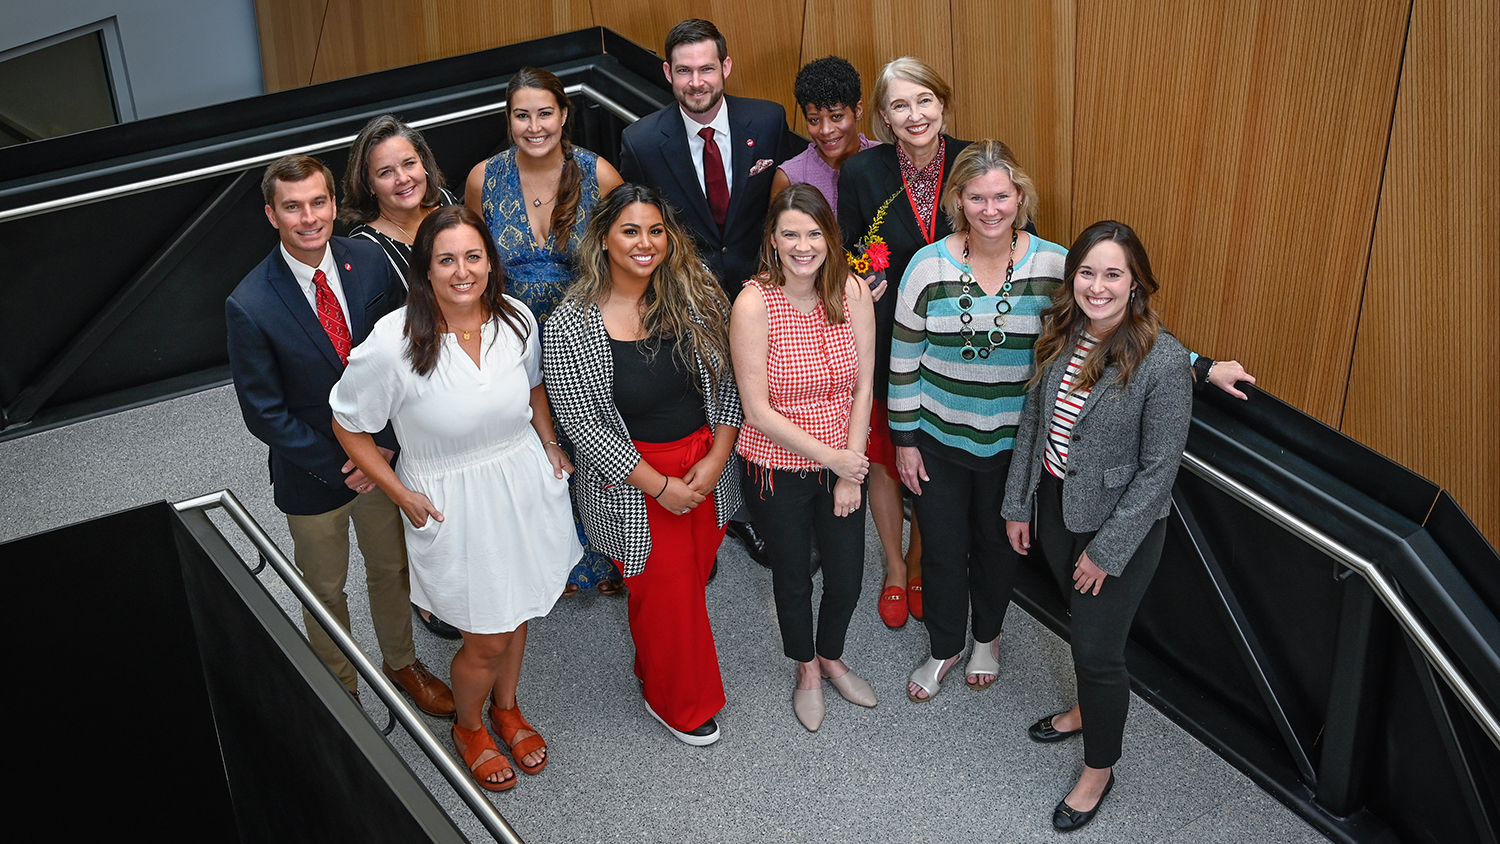 The Engineering Foundation staff pose for a picture on one of the stairwells in Fitts-Woolard Hall.